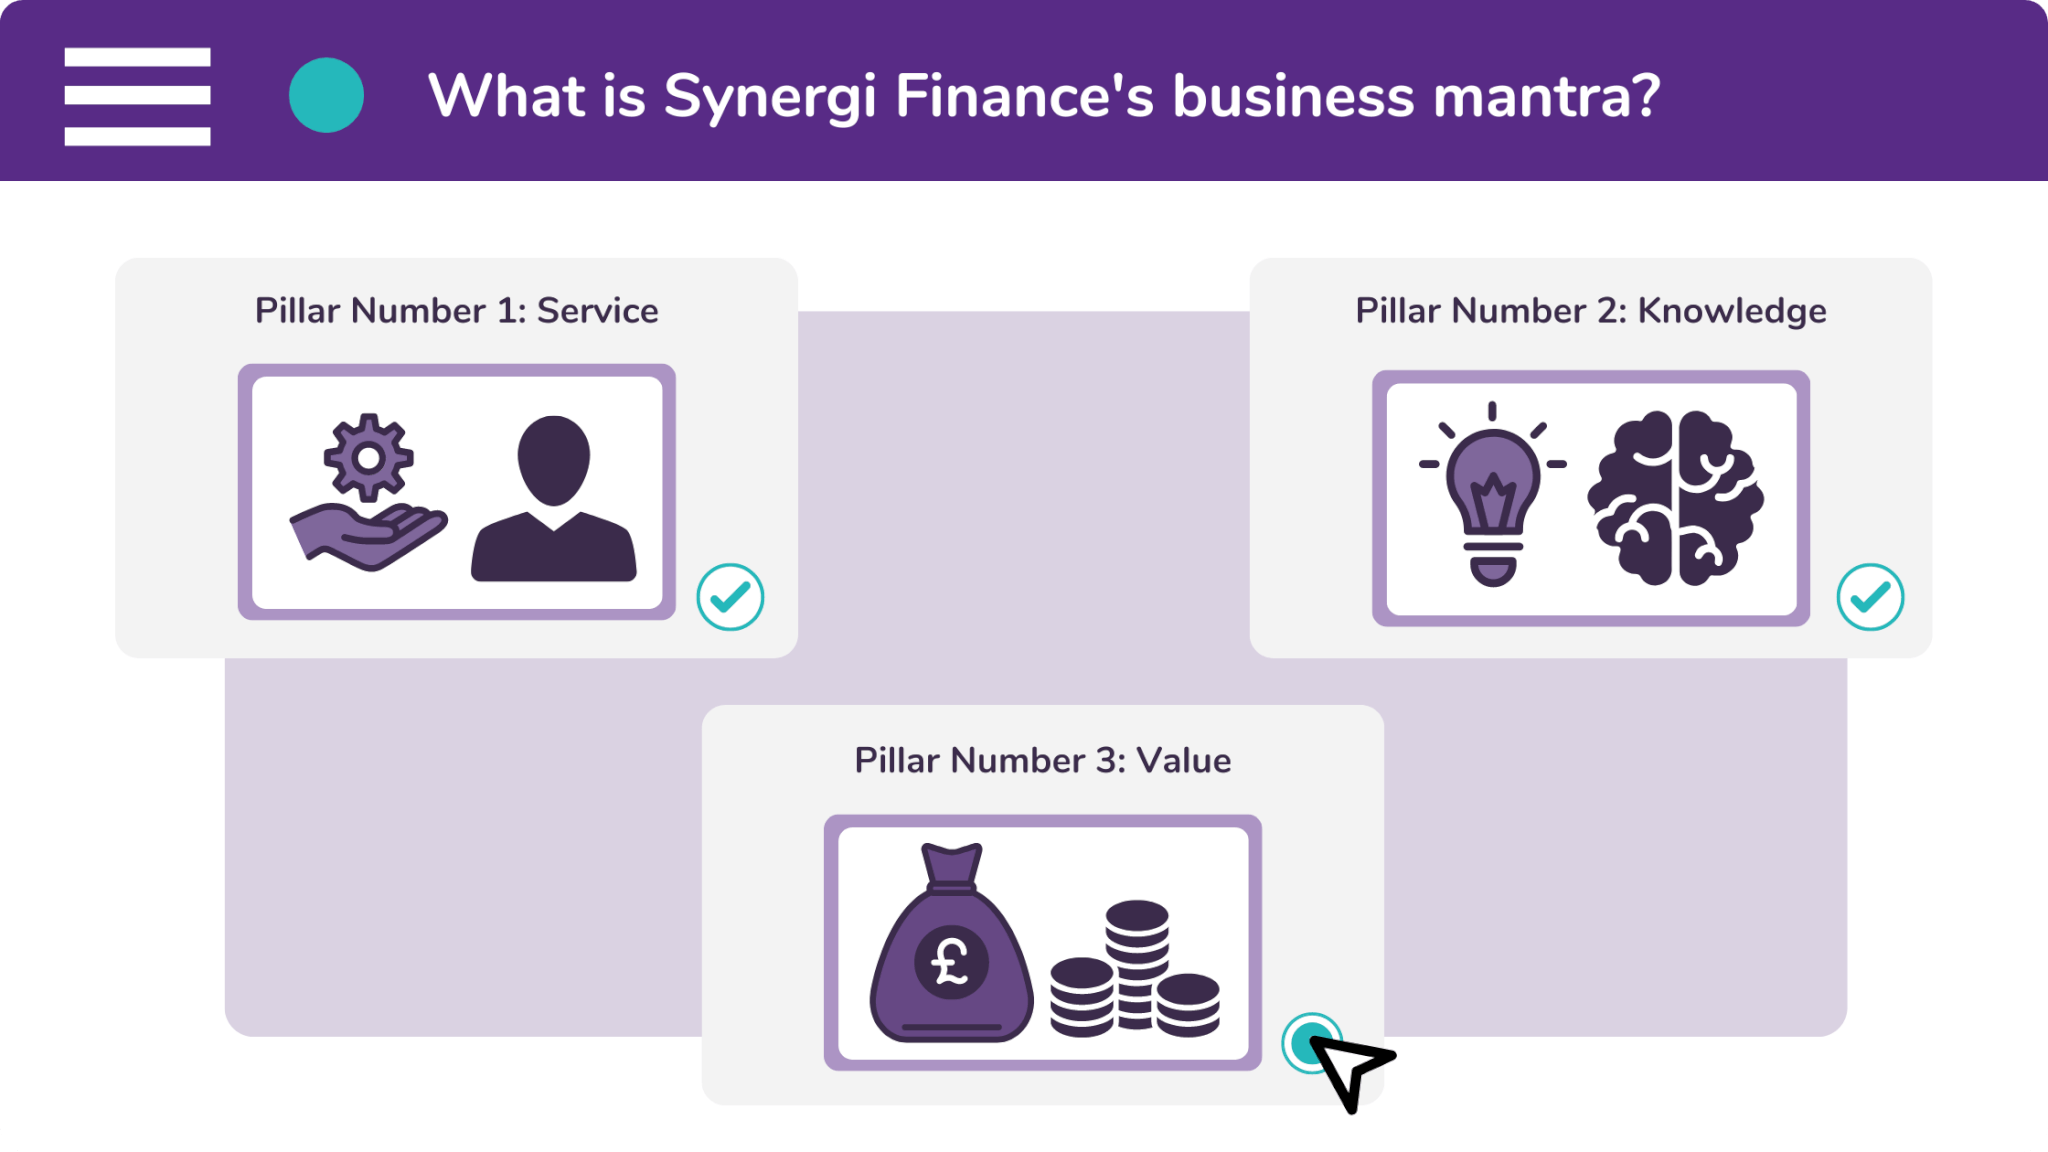 Synergi Finance's business mantra is 'Service, Knowledge, Value'.